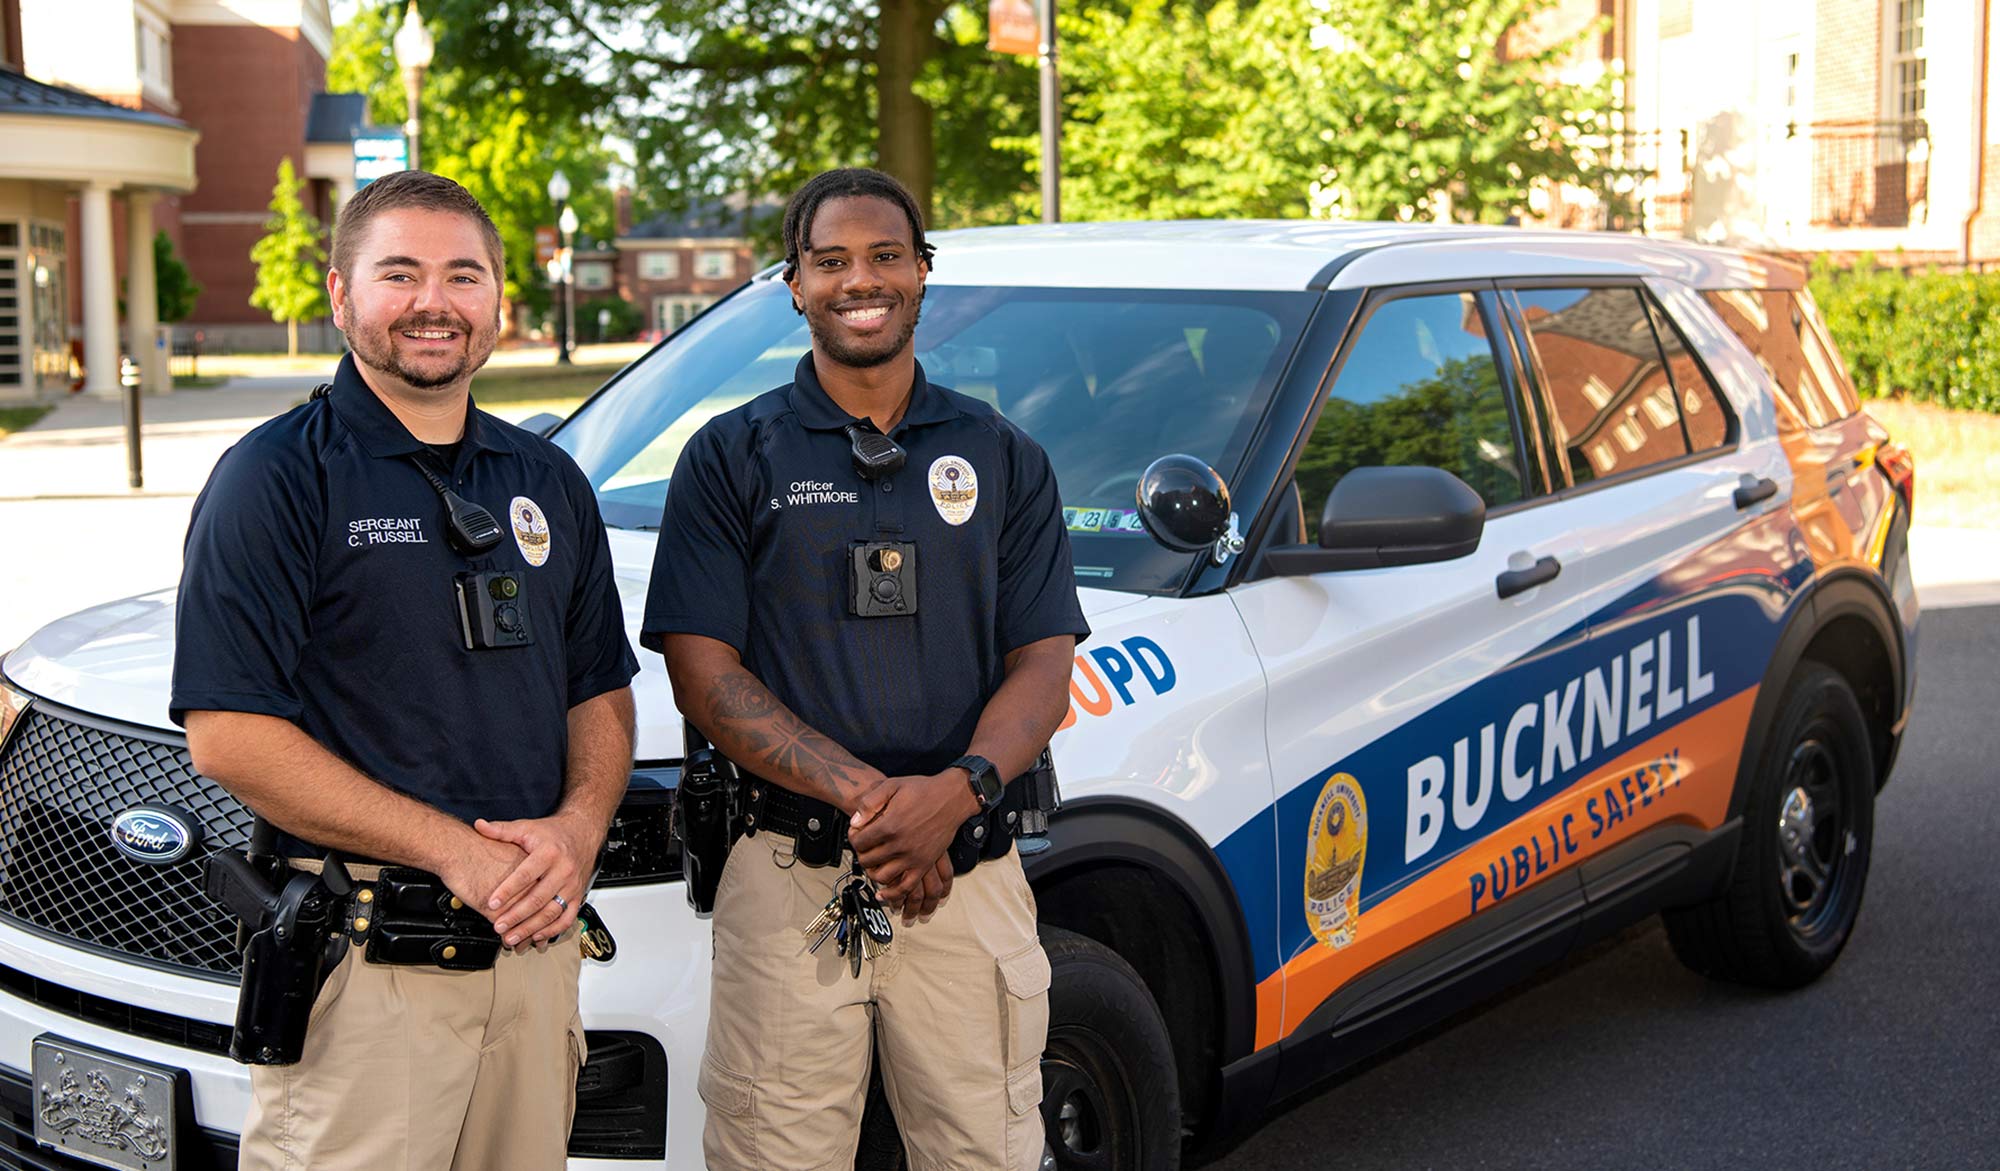 Two Bucknell Pubic Safety Officers posing in front of a Public Safety car